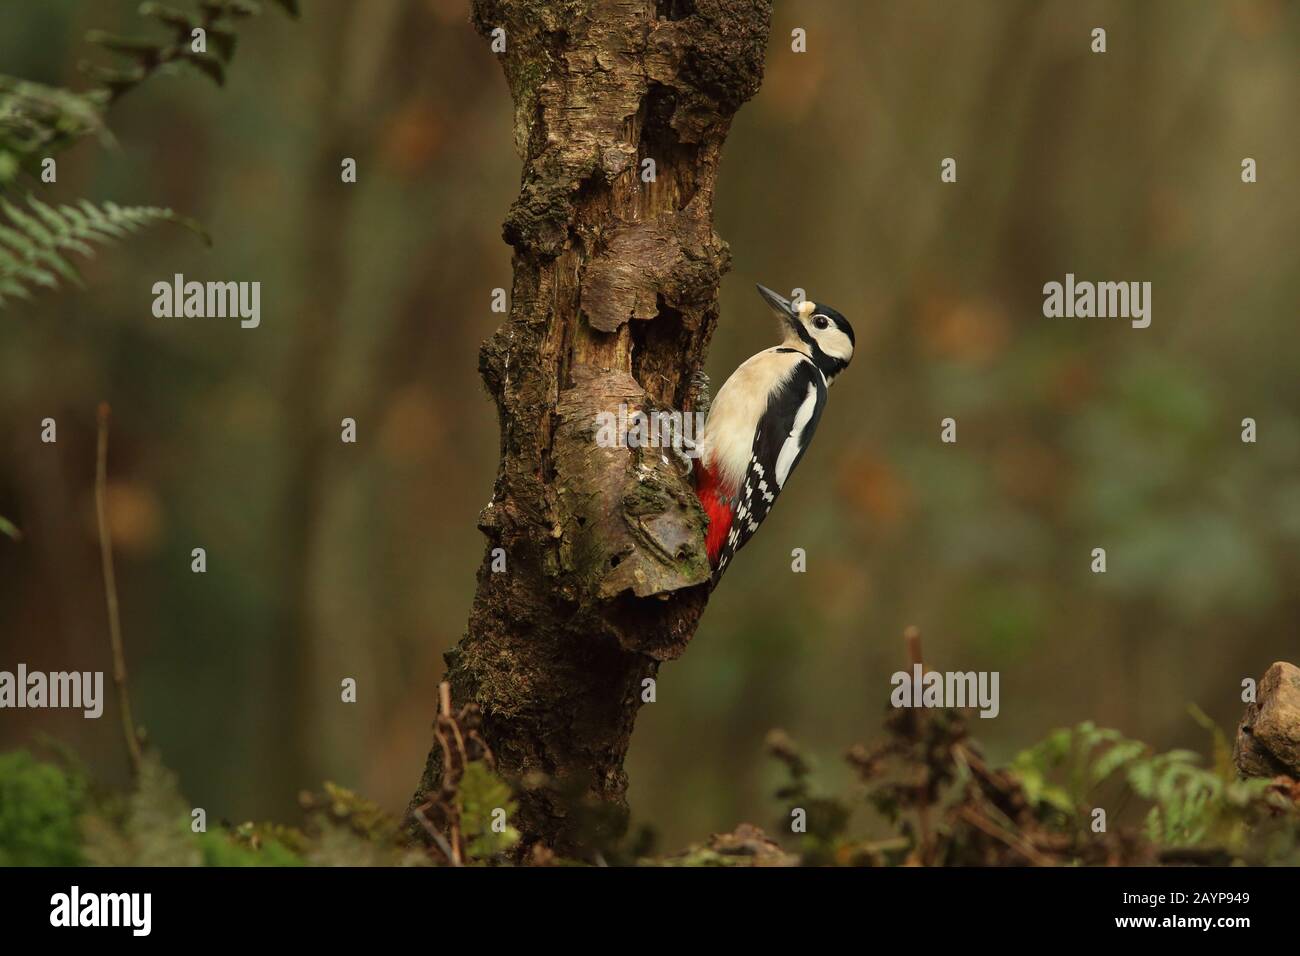 Great Spotted Woodpecker climbing a tree in the woods (bird of forest and woodlands) Stock Photo